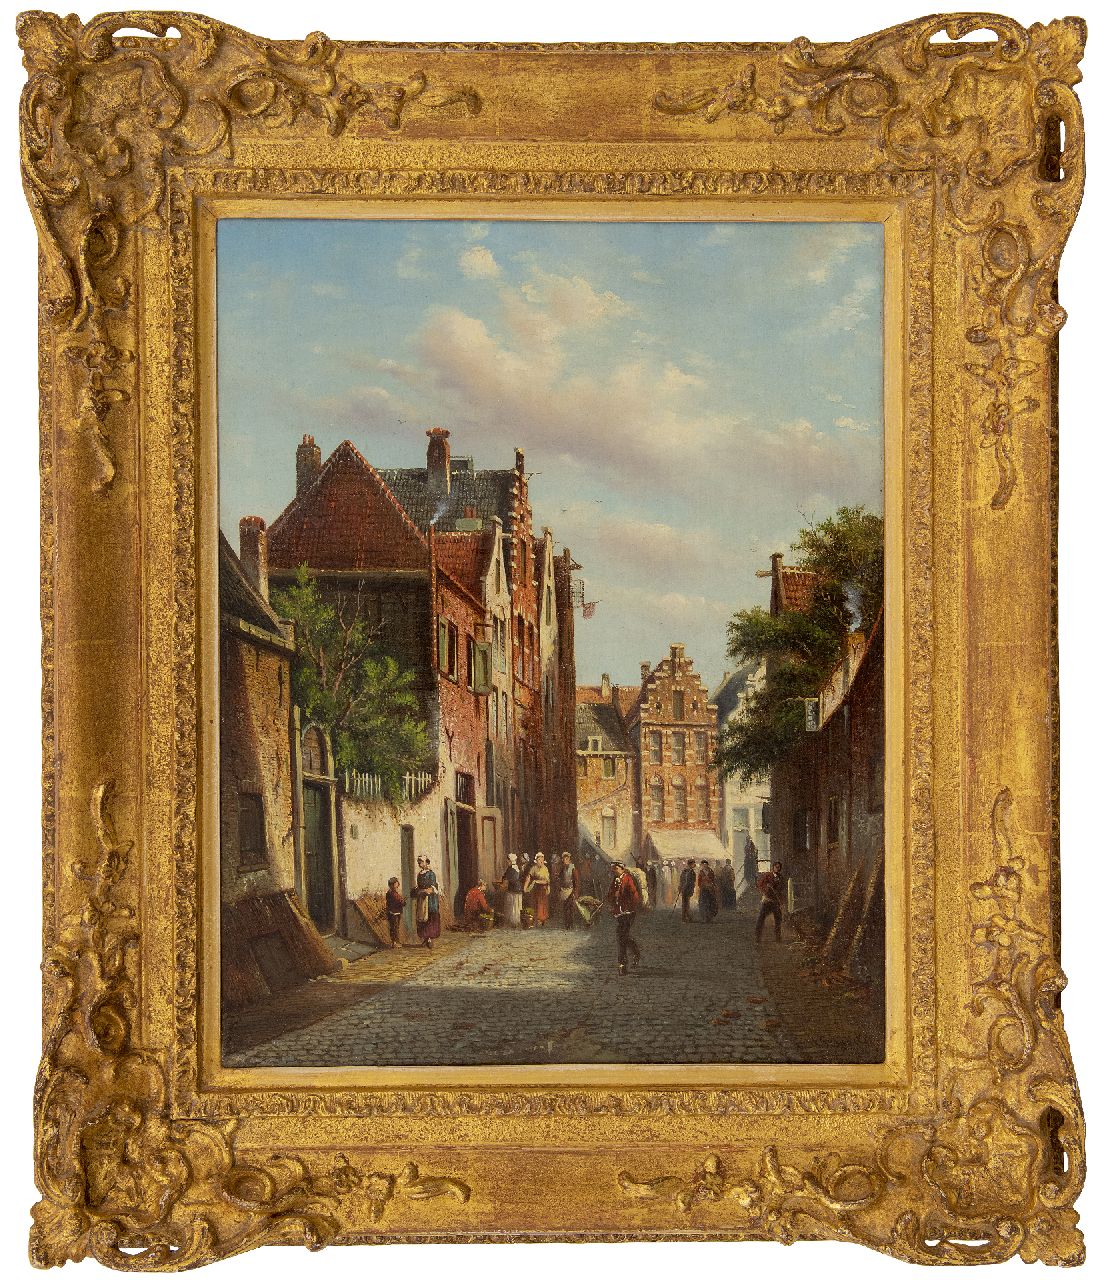 Spohler J.F.  | Johannes Franciscus Spohler | Paintings offered for sale | Daily activities in a sunlit street, oil on canvas 44.3 x 35.3 cm, signed l.r.